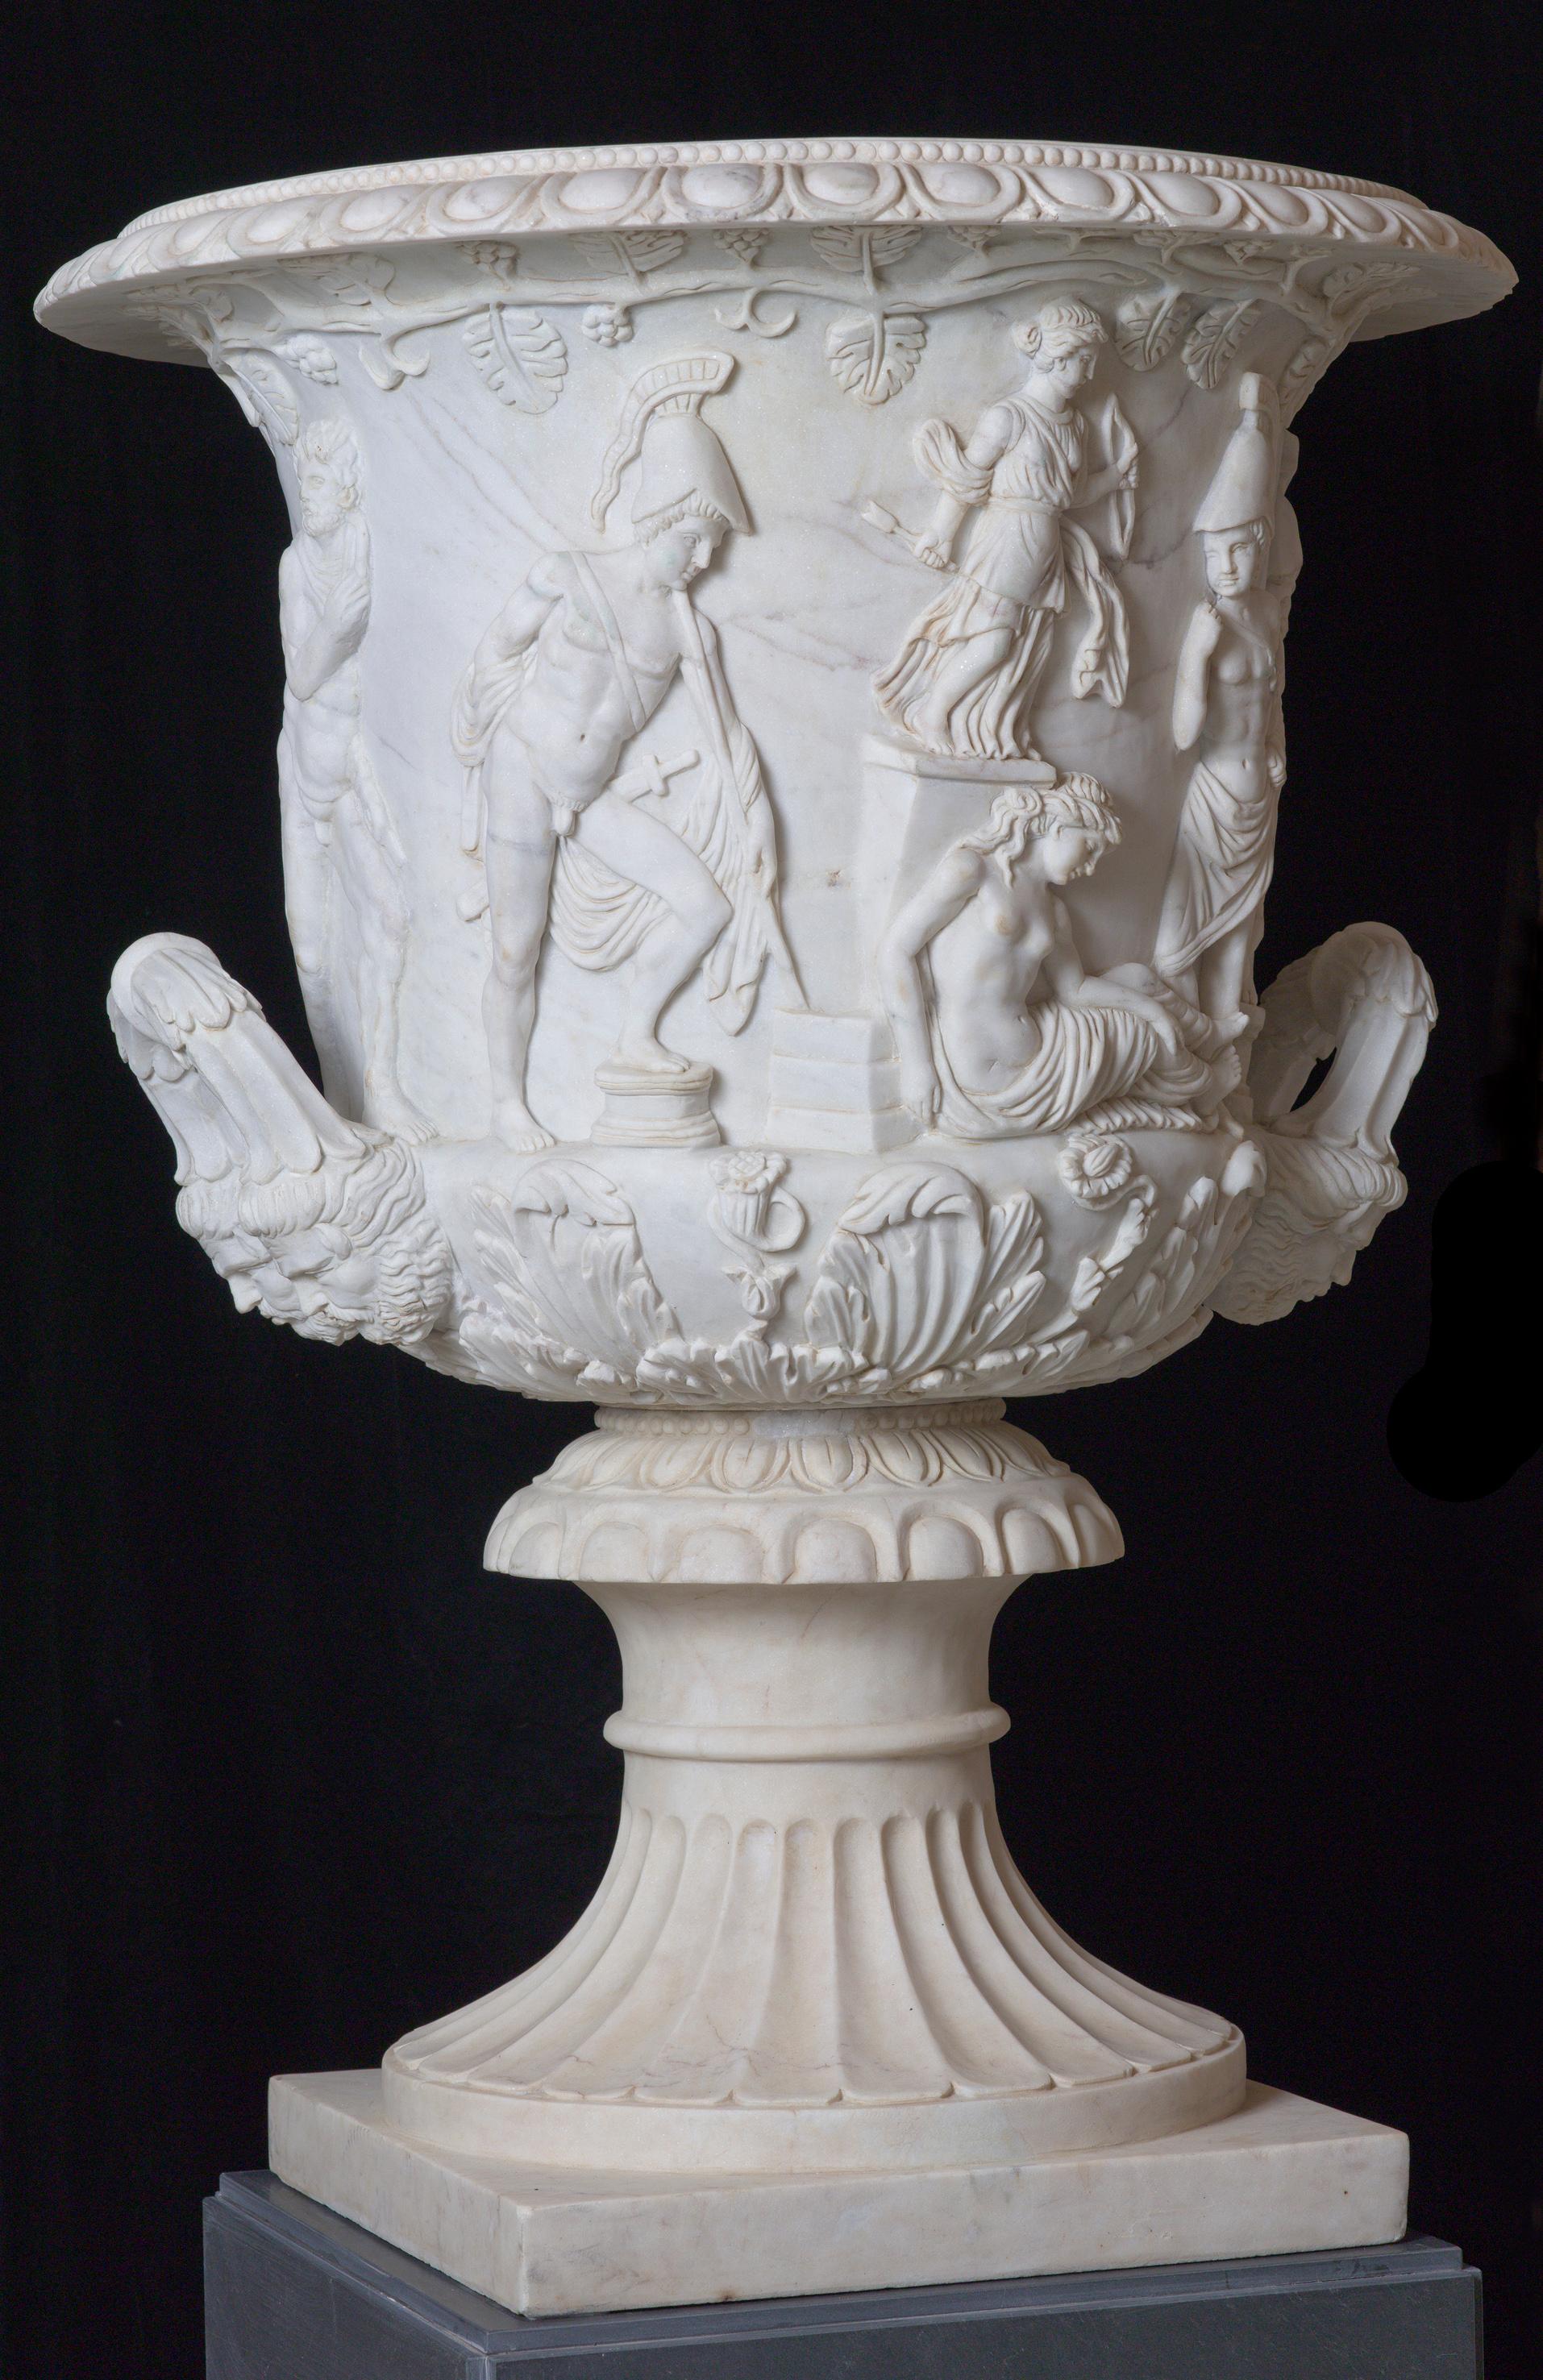 Italian Statuary White Marble Medici Vase after the Classical Greek For Sale 3